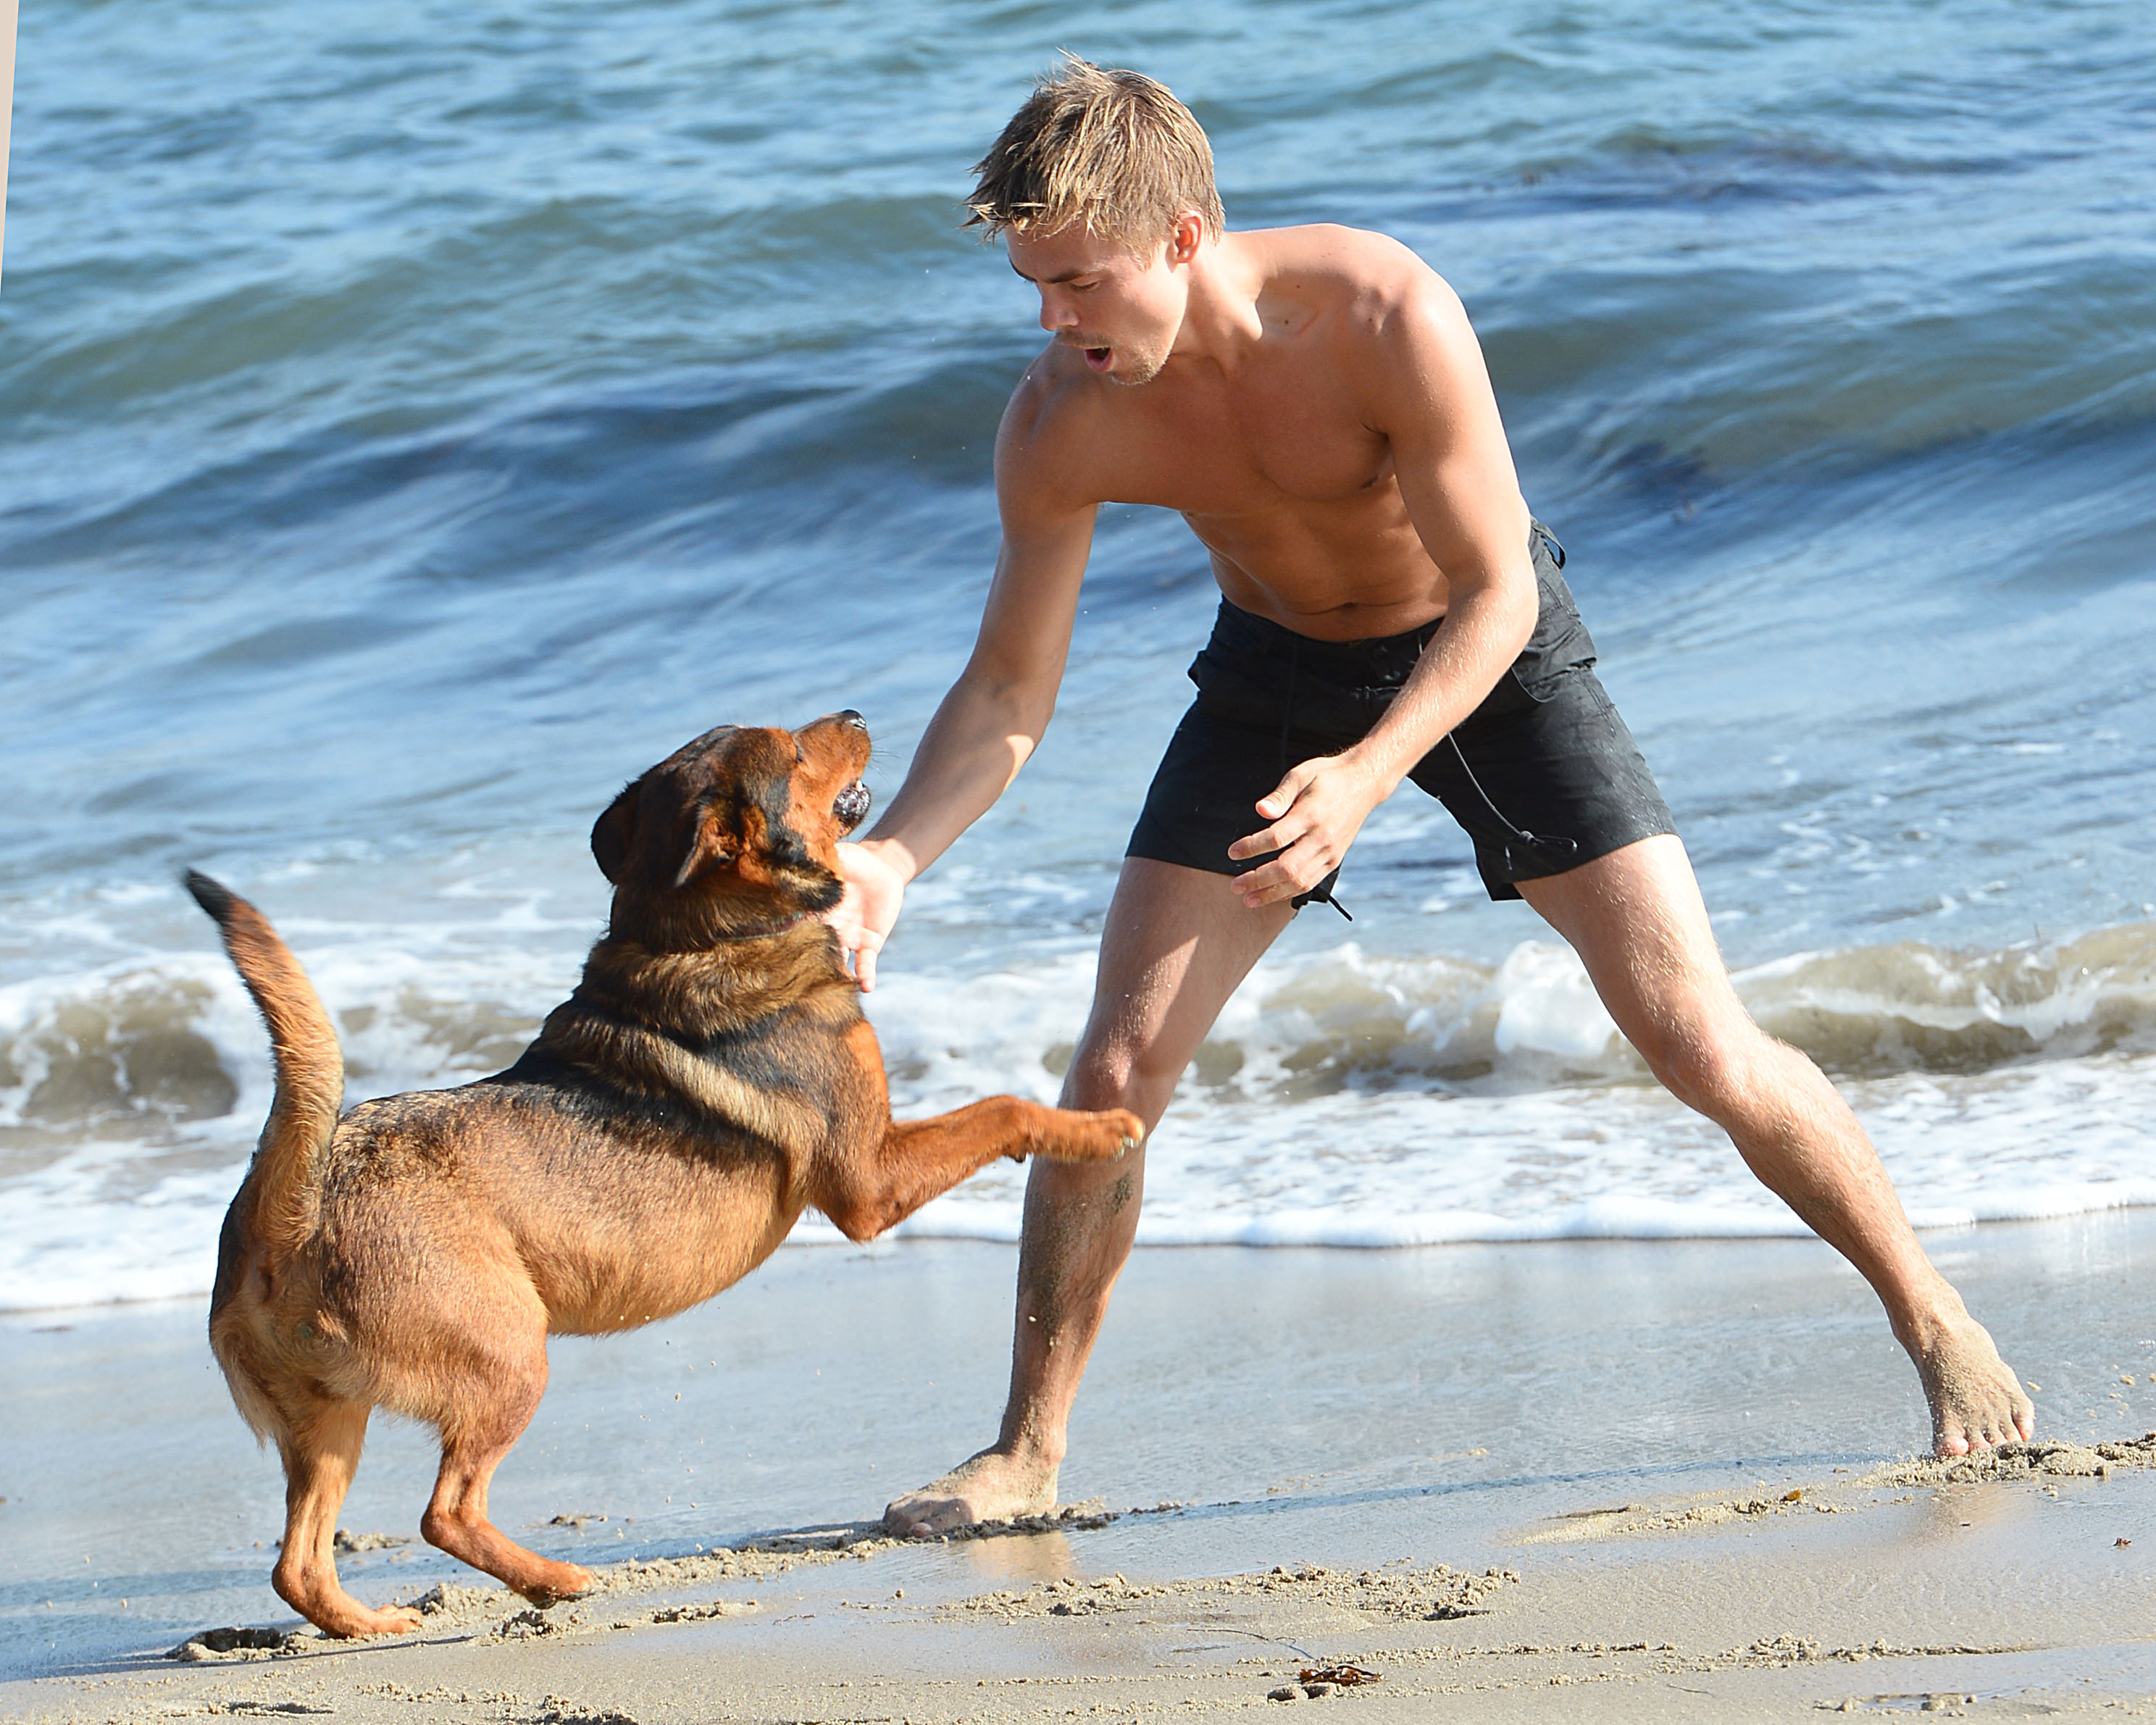 Derek Hough Hosts a Beach Party at The Revolve Beach House - photo by Brian Lindensmith